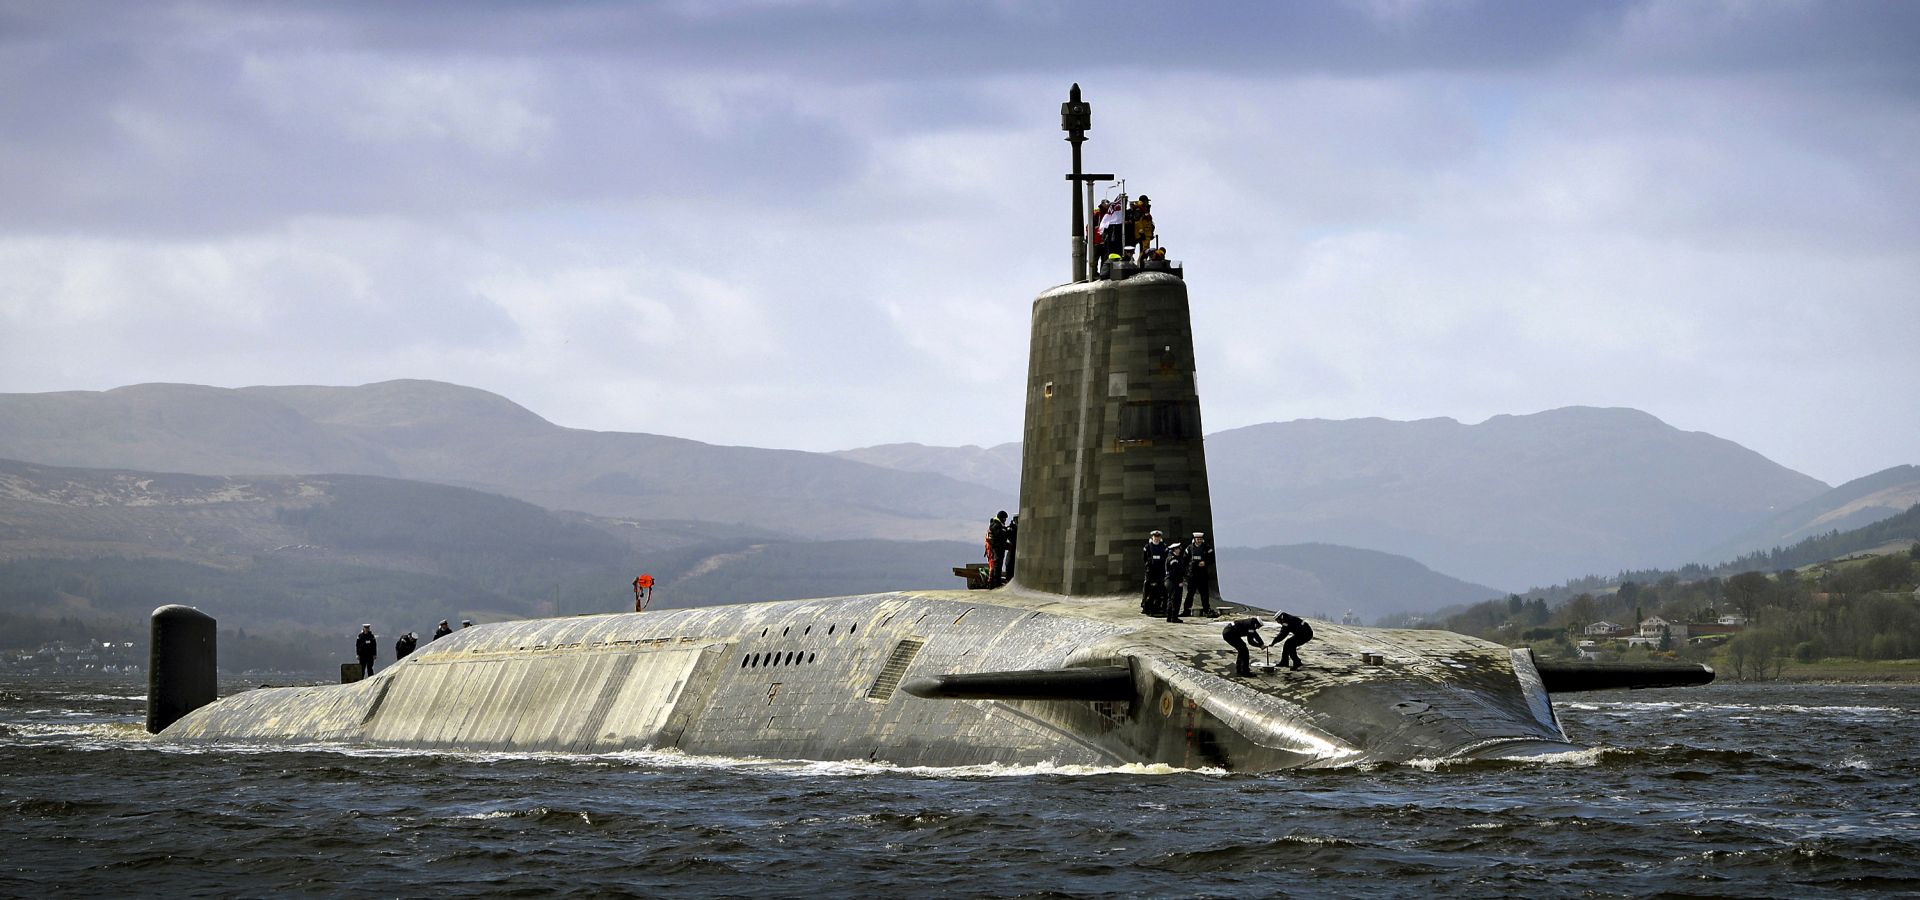 HMS Vigilant is the third Vanguard-class submarine of the Royal Navy. Vigilant carries the Trident ballistic missile, the United Kingdom's nuclear deterrent.